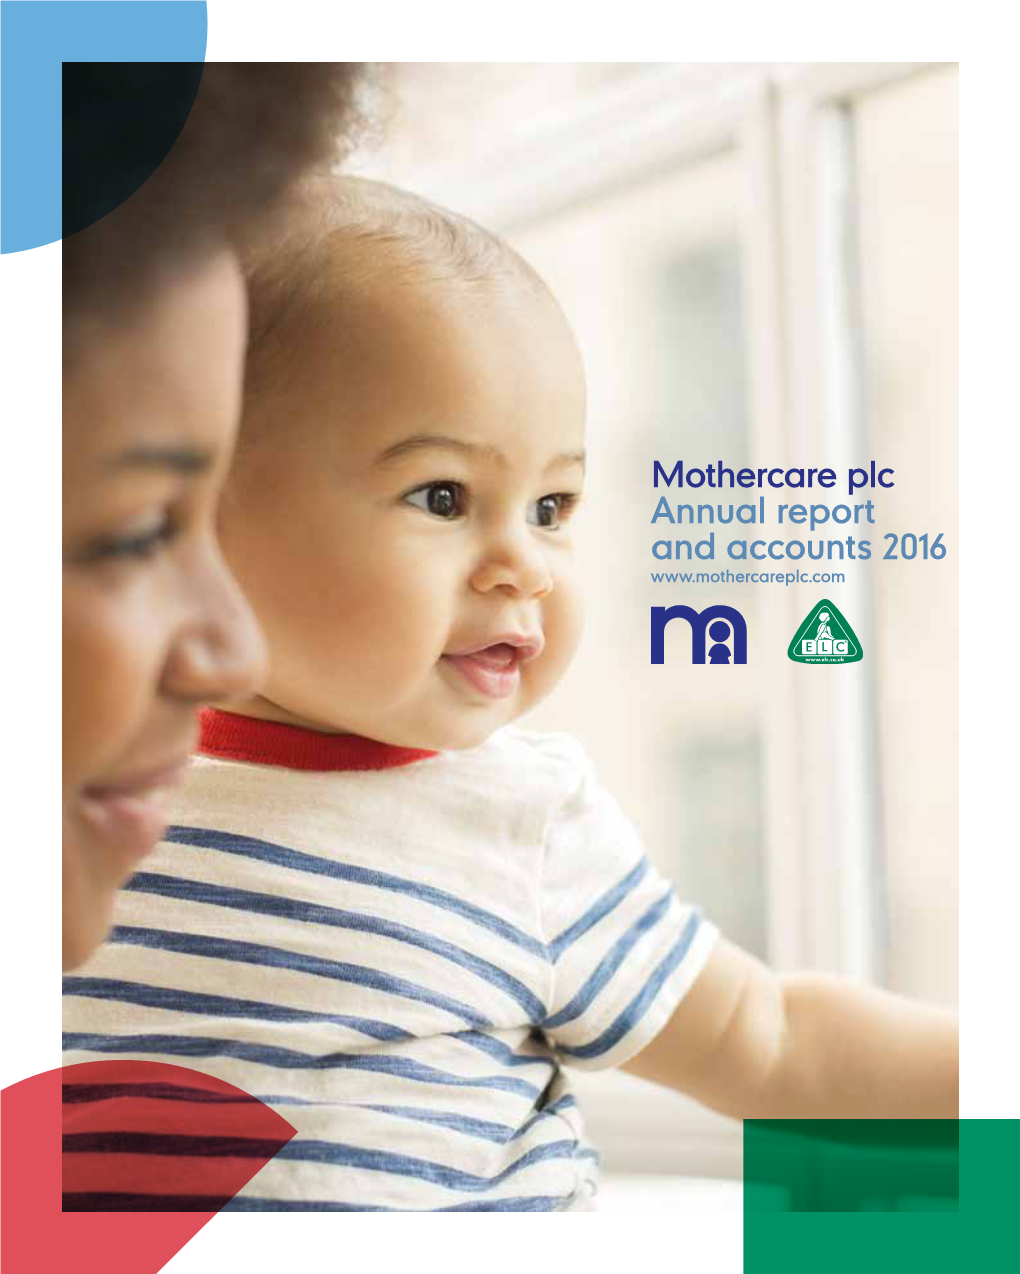 Mothercare Plc Annual Report and Accounts 2016 at a Glance